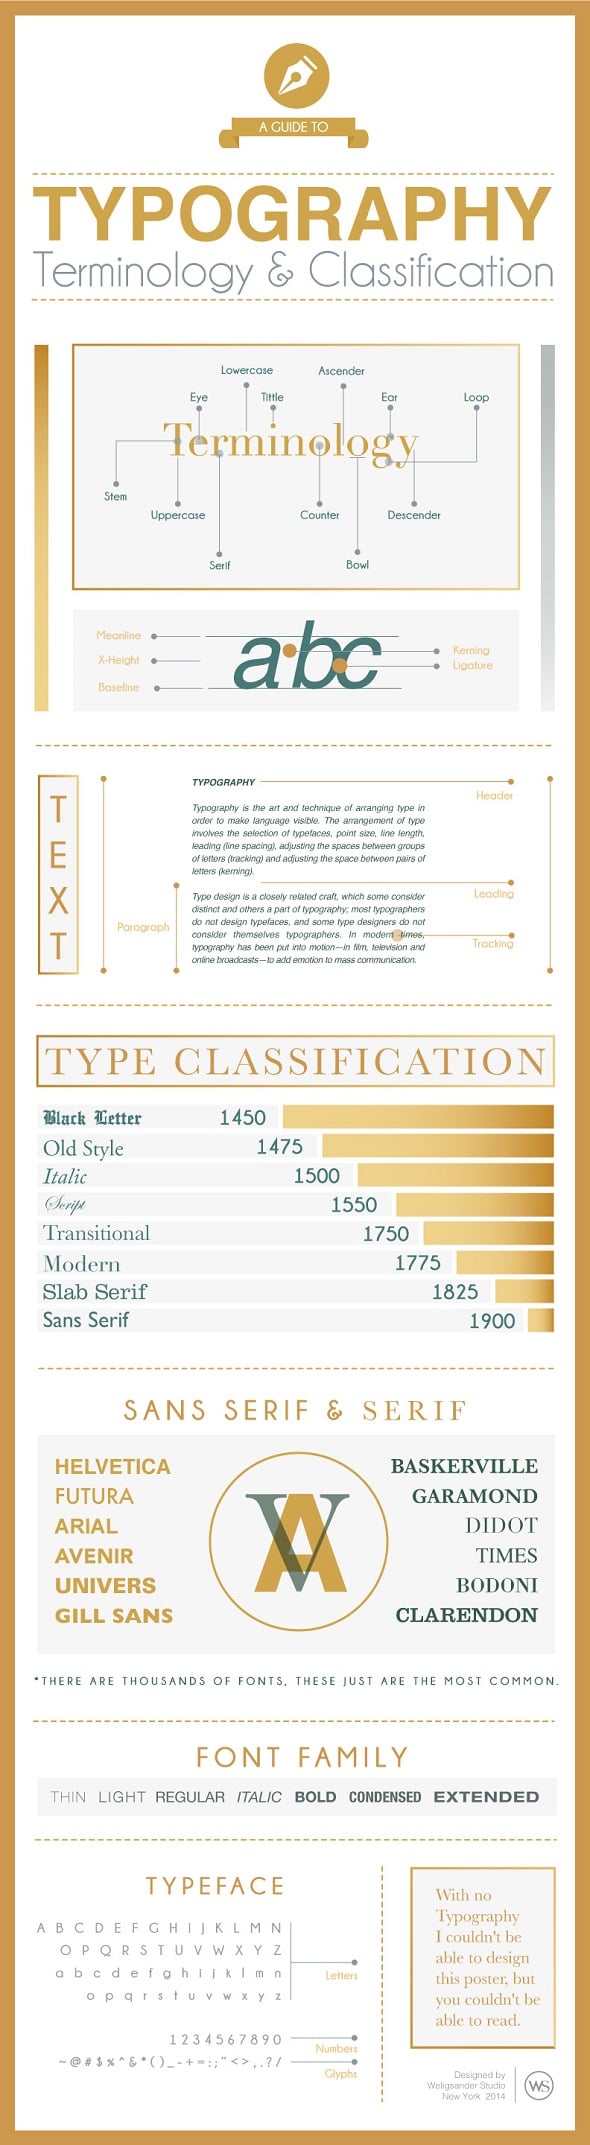 Learn Typography Terminology and Classification